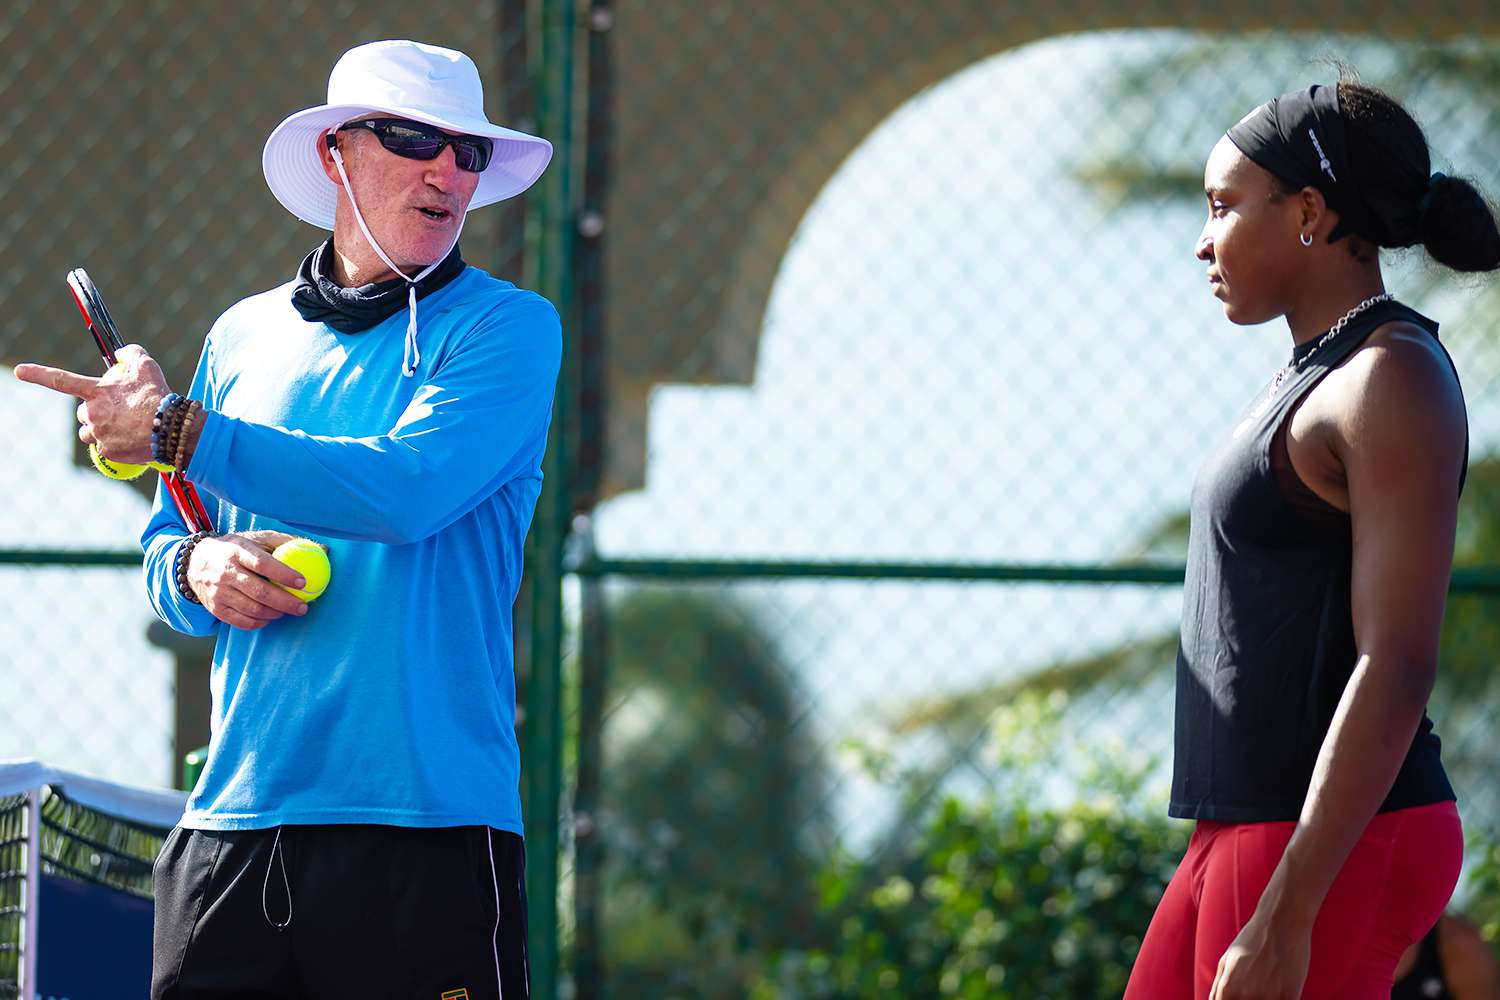 Coco Gauff's Coach Brad Gilbert Says She's 'Focused on the Moment' Before French Open and Olympics (Exclusive)